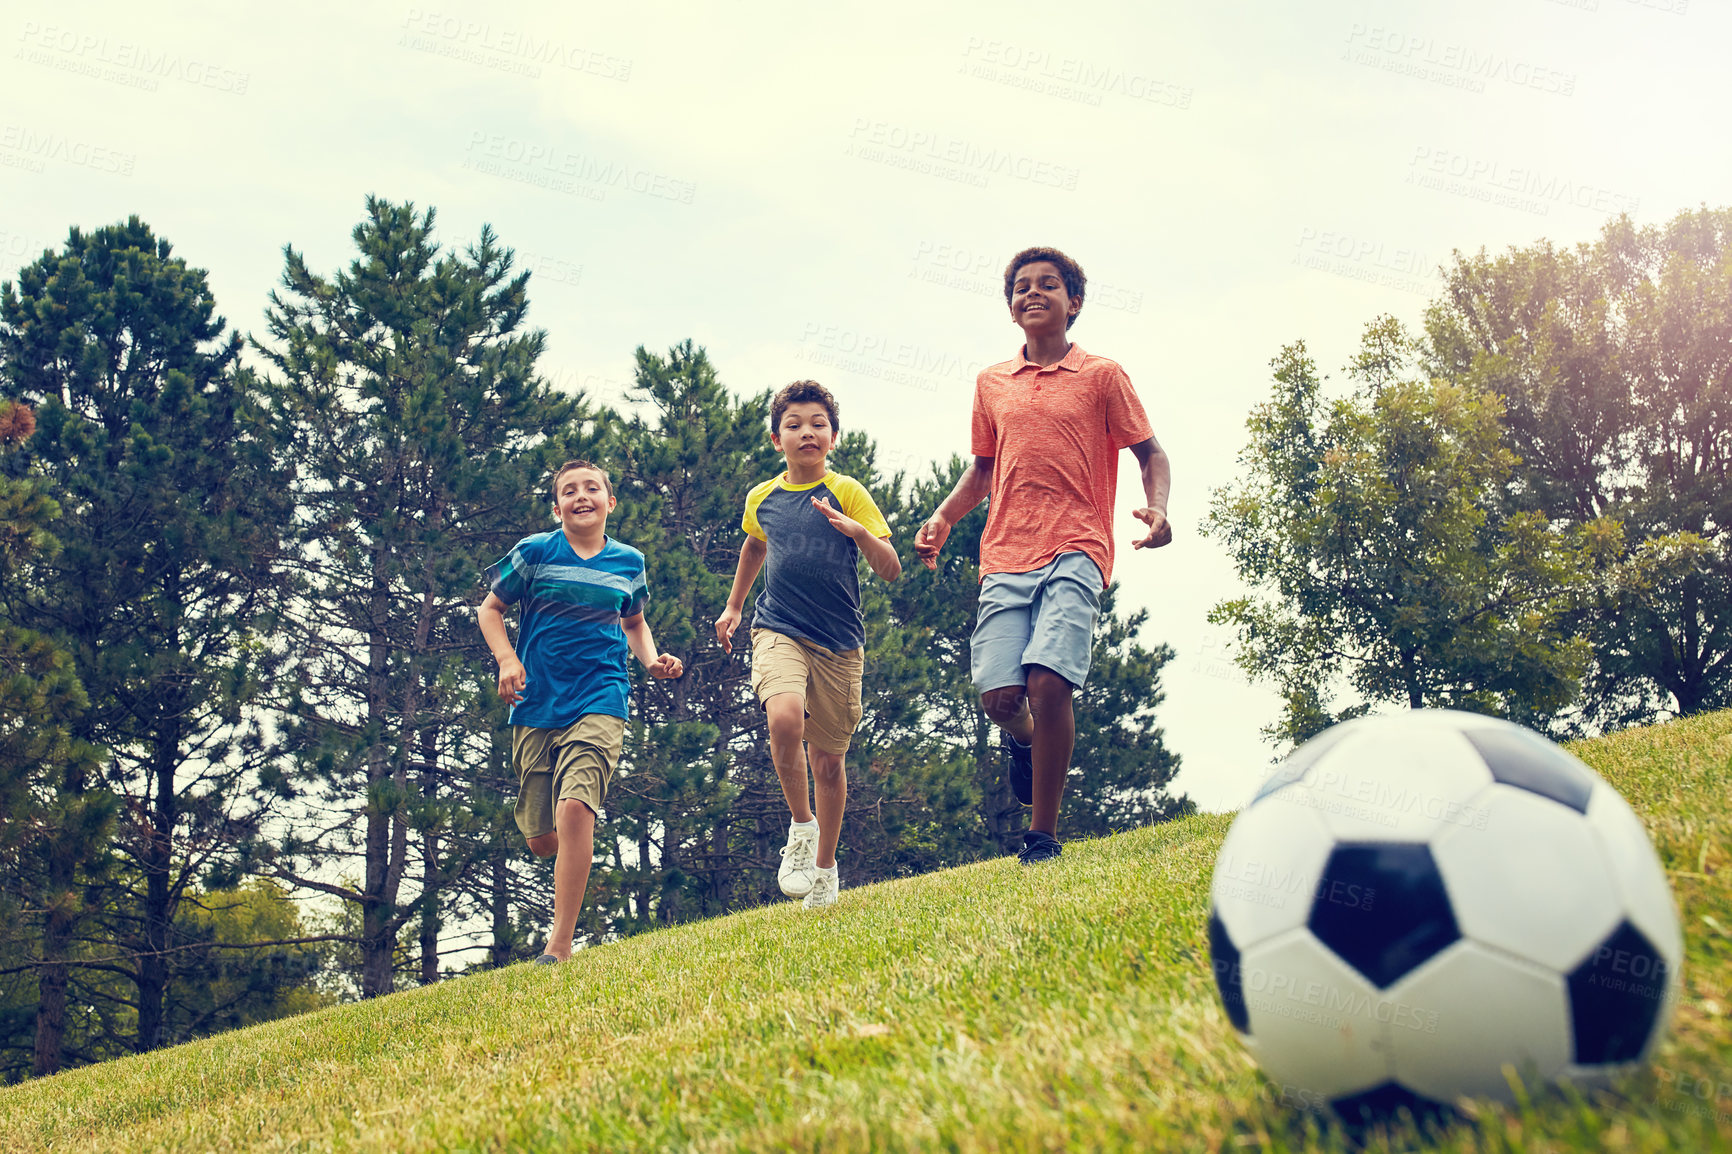 Buy stock photo Shot of young boys playing soccer on a field outdoors